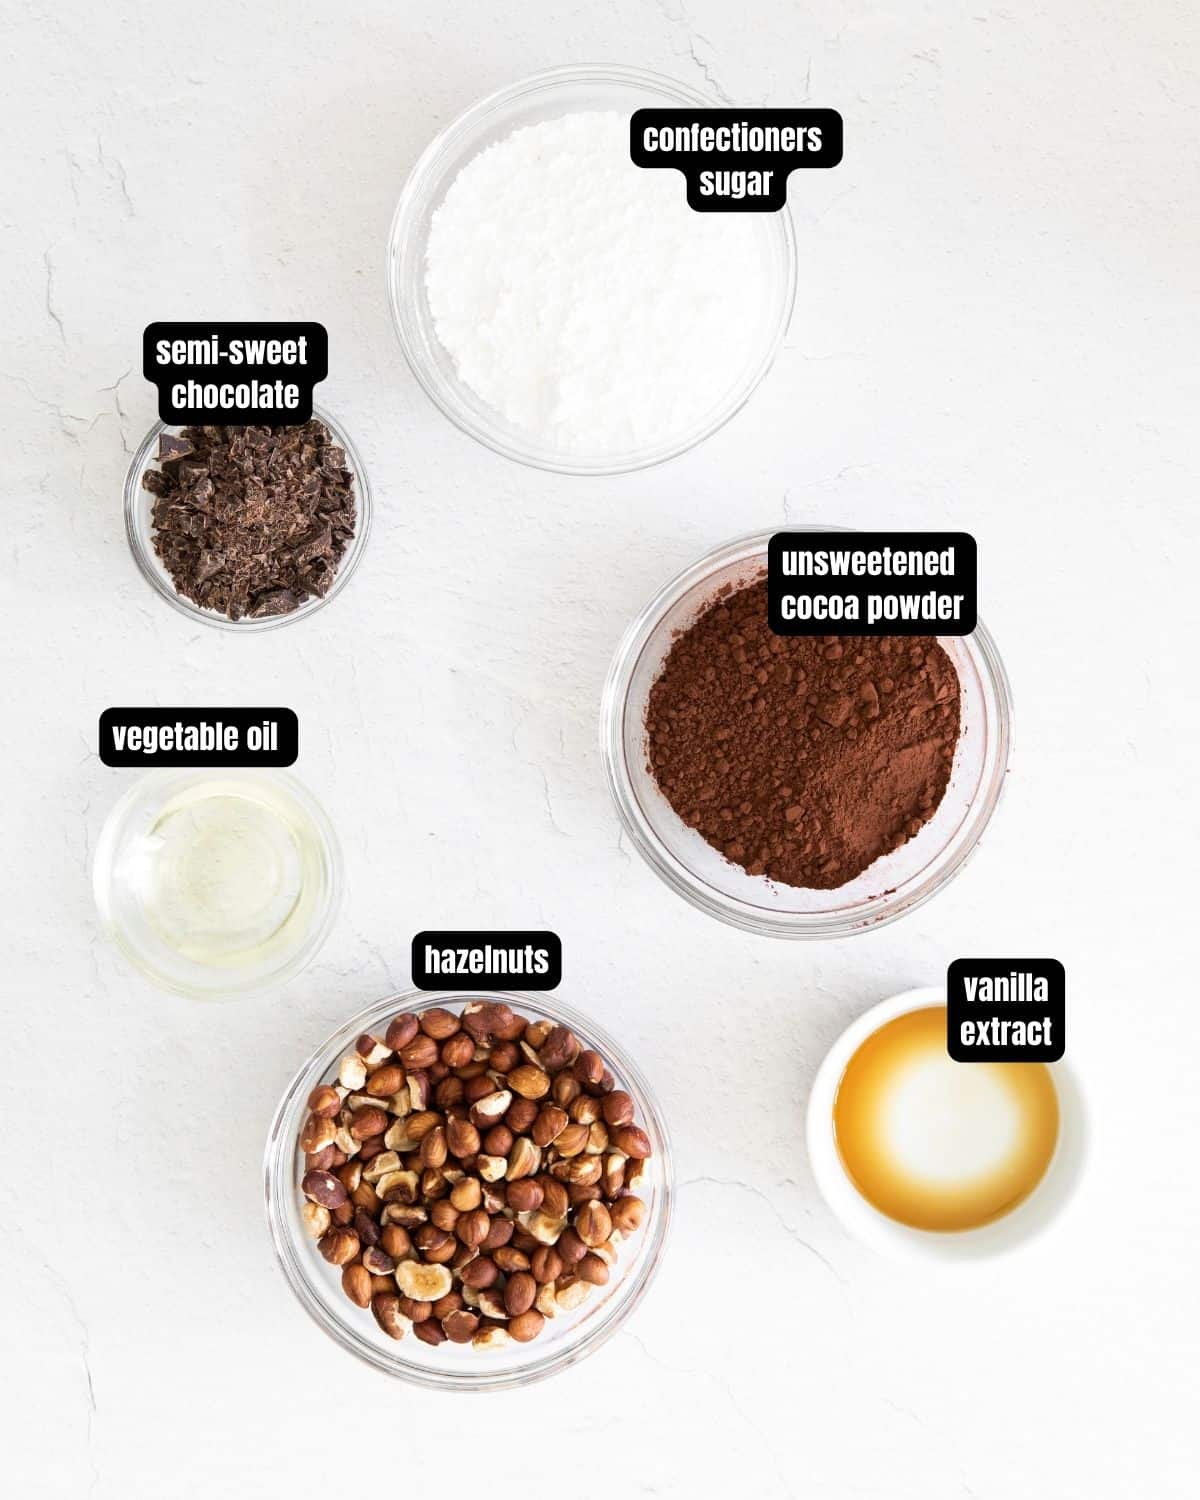 A photo with text overlay of ingredients; confectioners sugar, semi-sweet chocolate, unsweetened cocoa powder, vegetable oil, hazelnuts, vanilla extract on a white table.